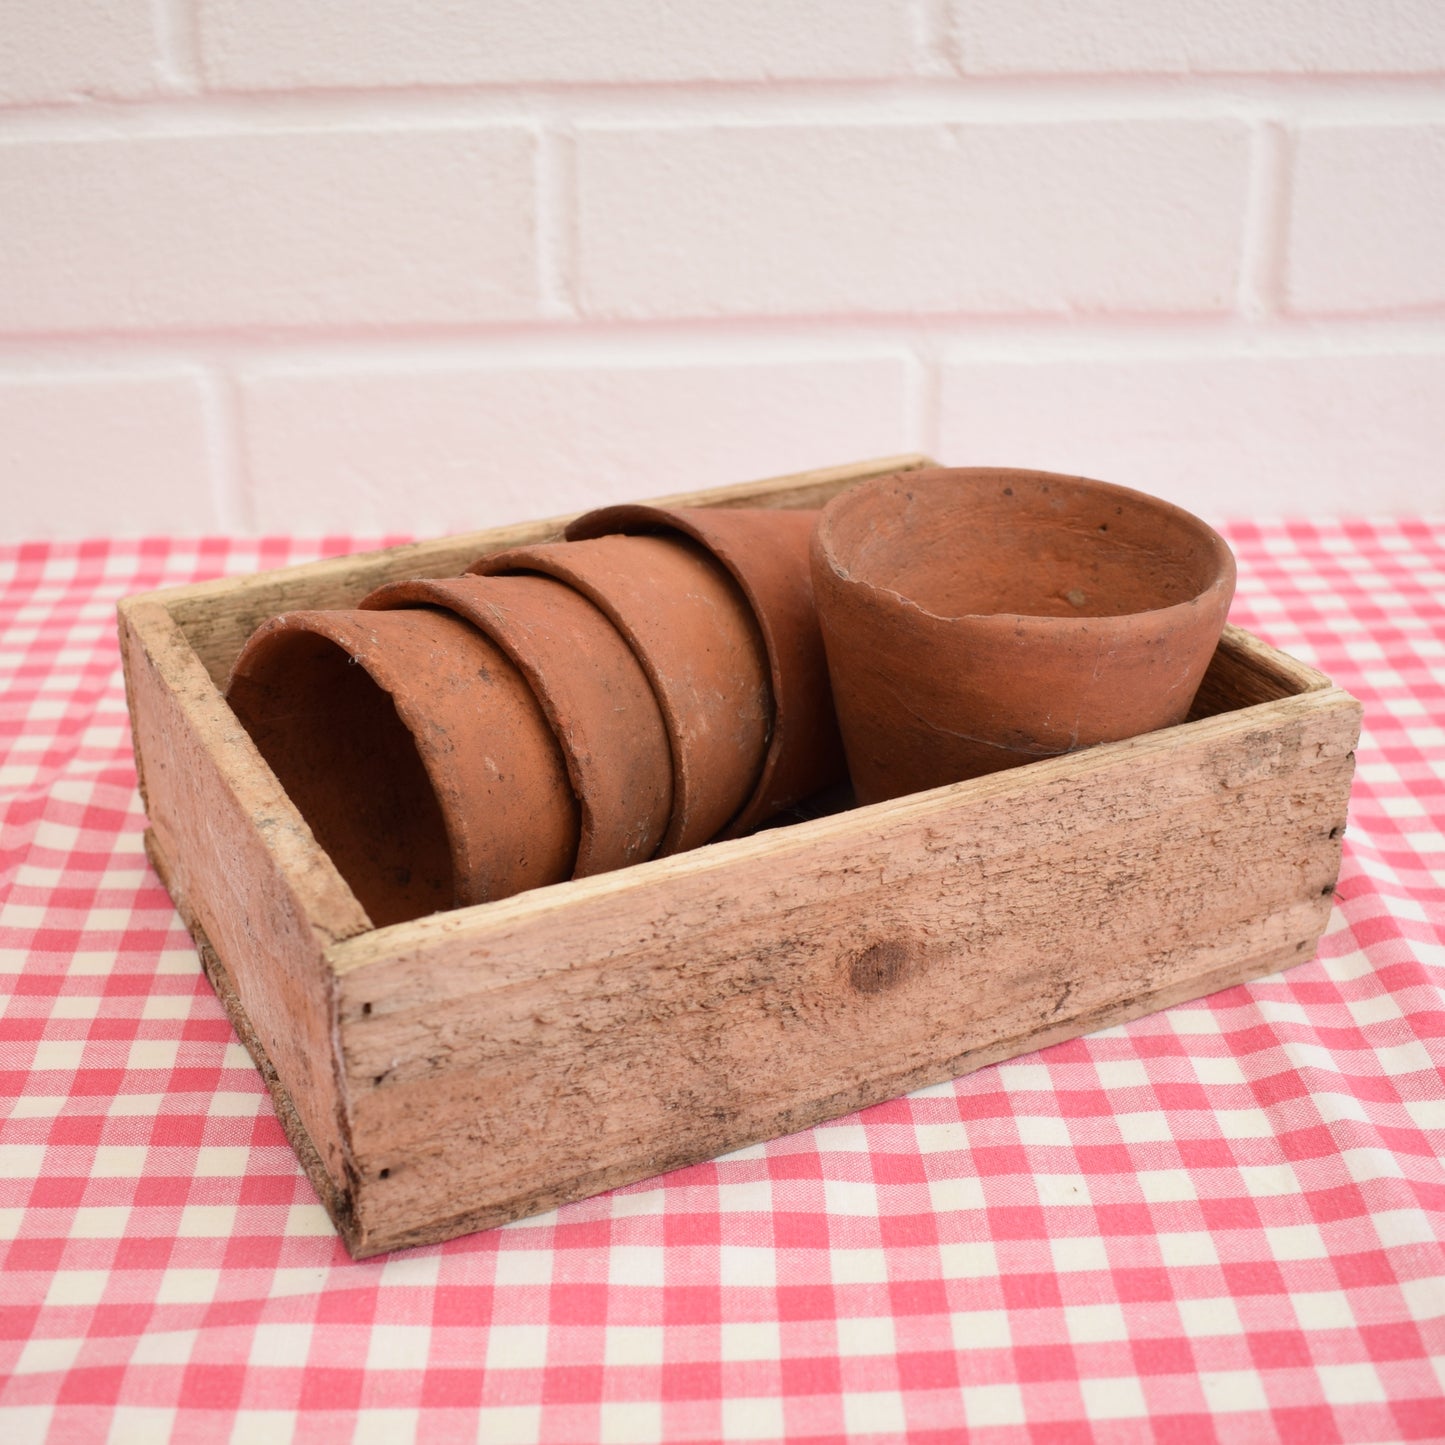 Vintage Small Terracotta Pots In Wooden Seed Tray